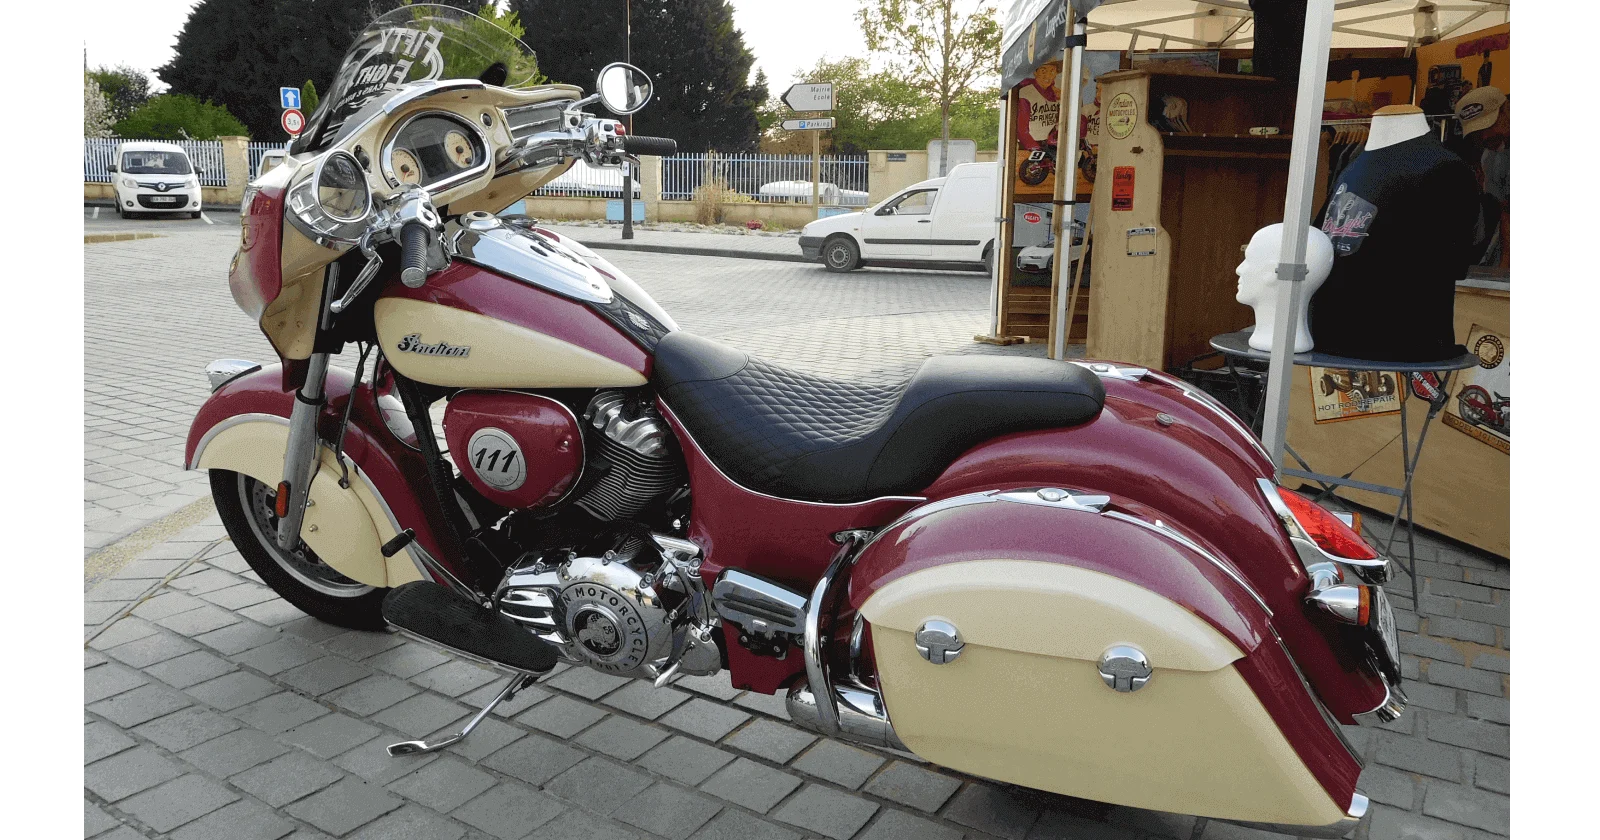 Upcoming Indian Motorcycle Bikes in India: Expected Launch Date & Price